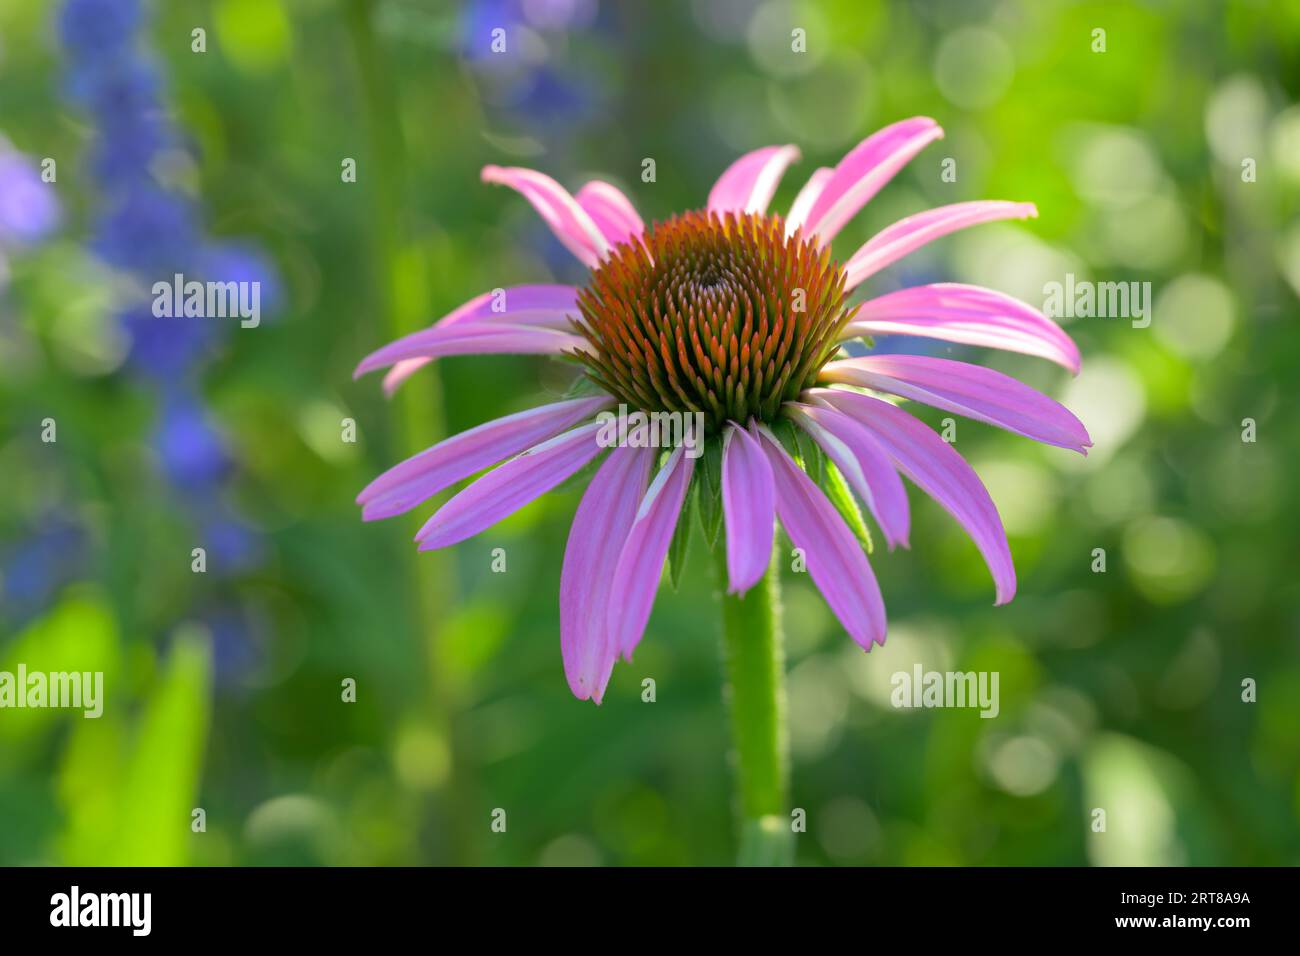 Beautiful Purple Coneflower back lit, against green and purple floral background Stock Photo